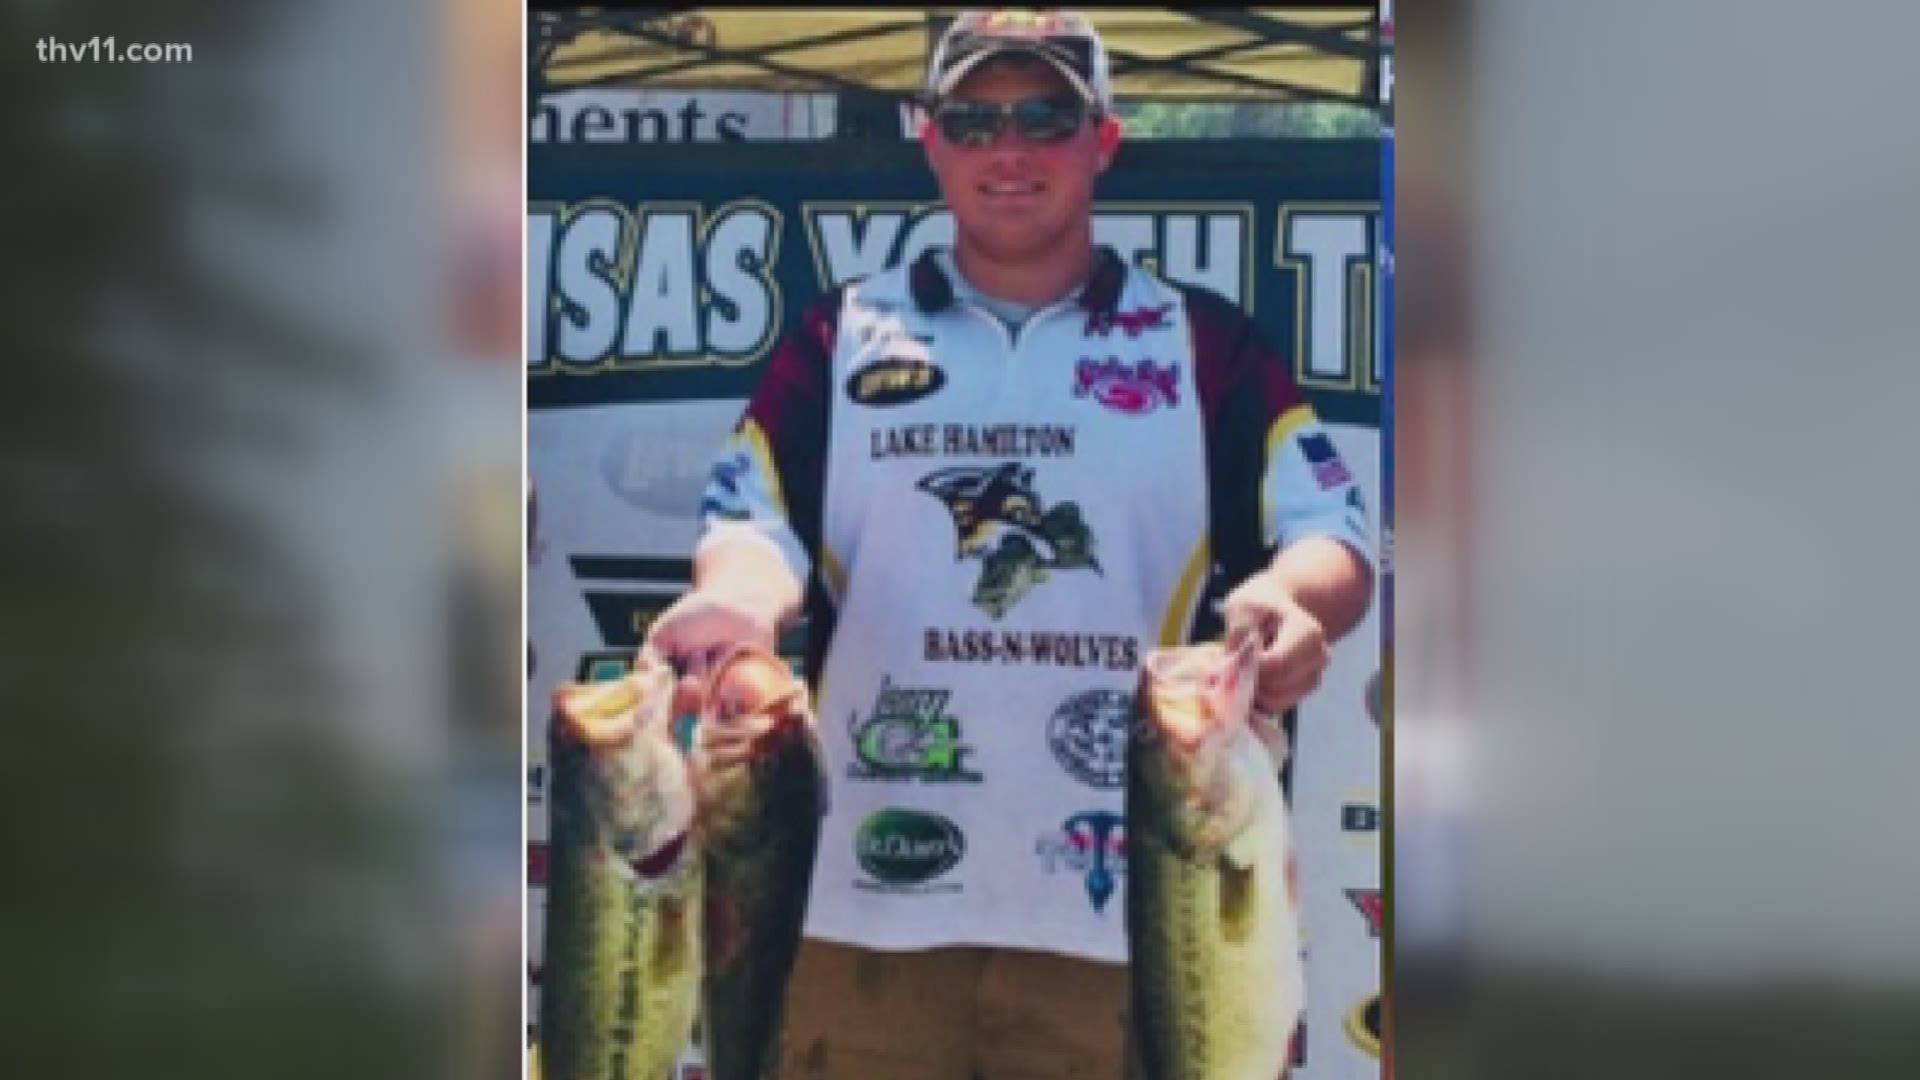 An Arkansas high school kid is spending his weekend fishing but has his eyes on bigger prizes beyond high school bass tournaments.